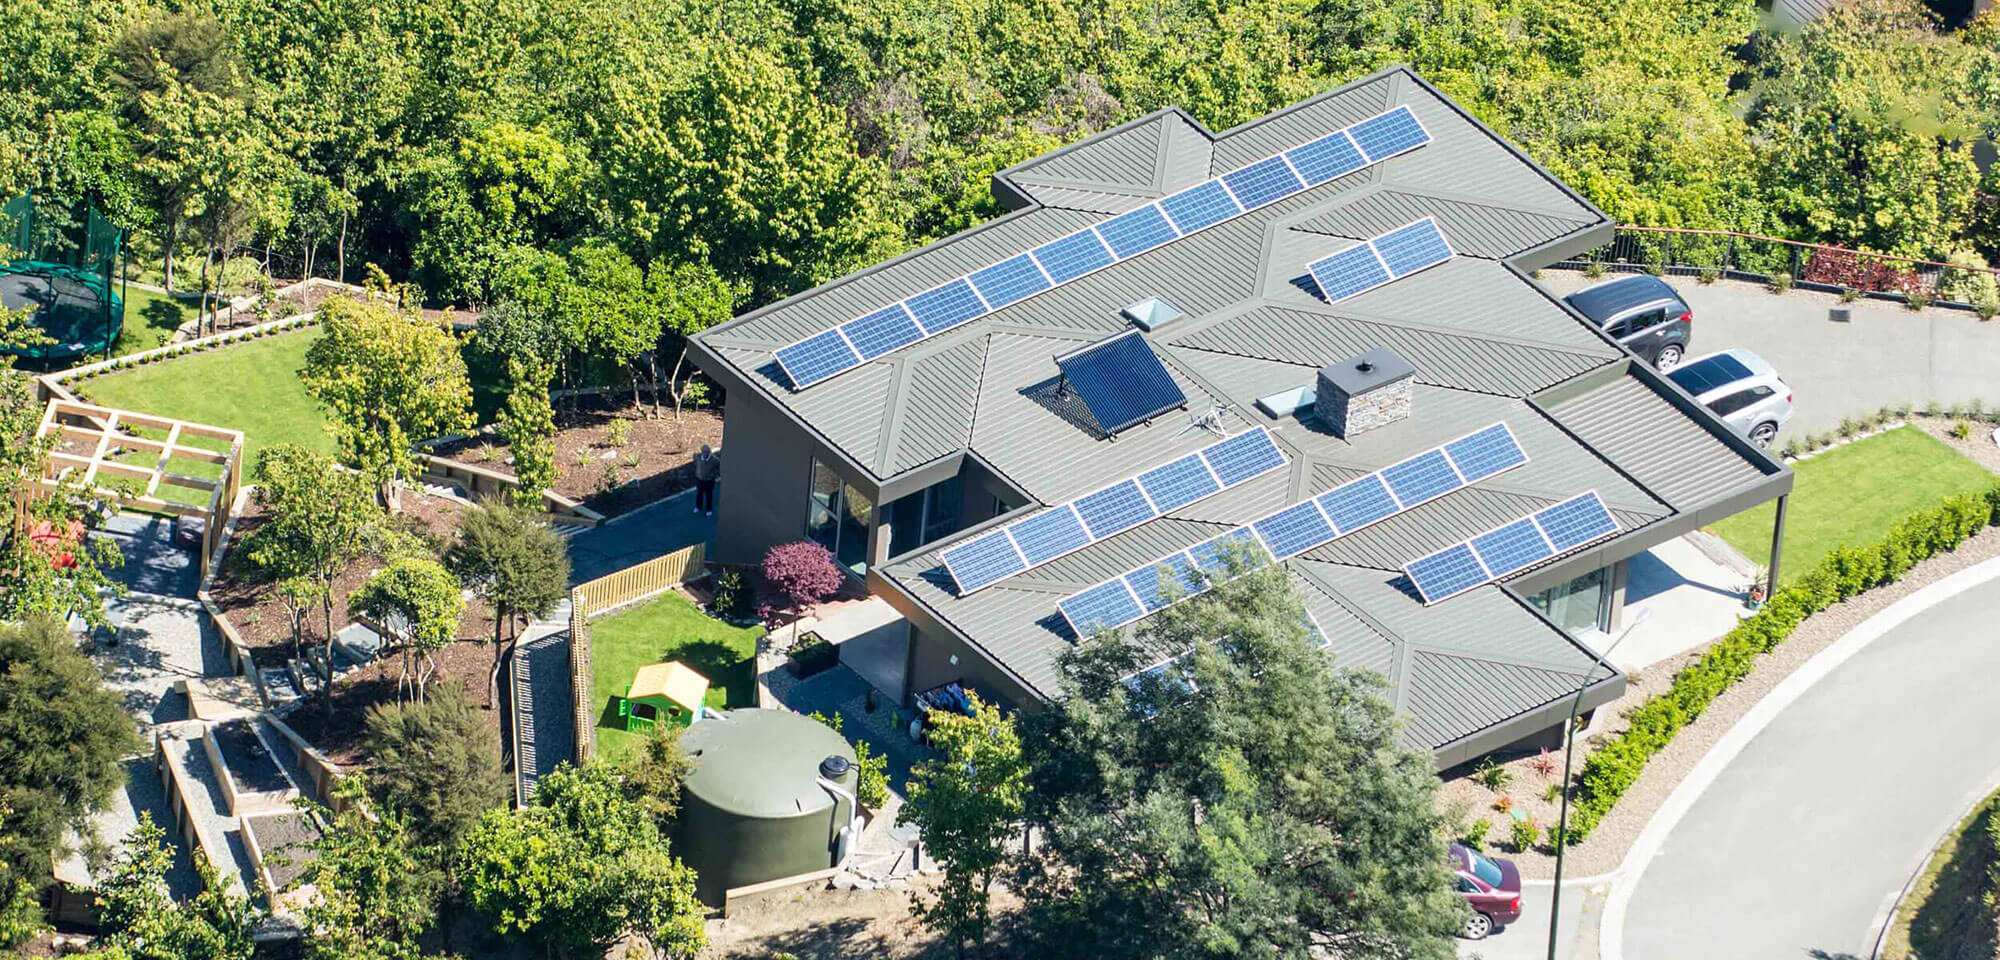 Nelson residential home with solar panel installation on the roof